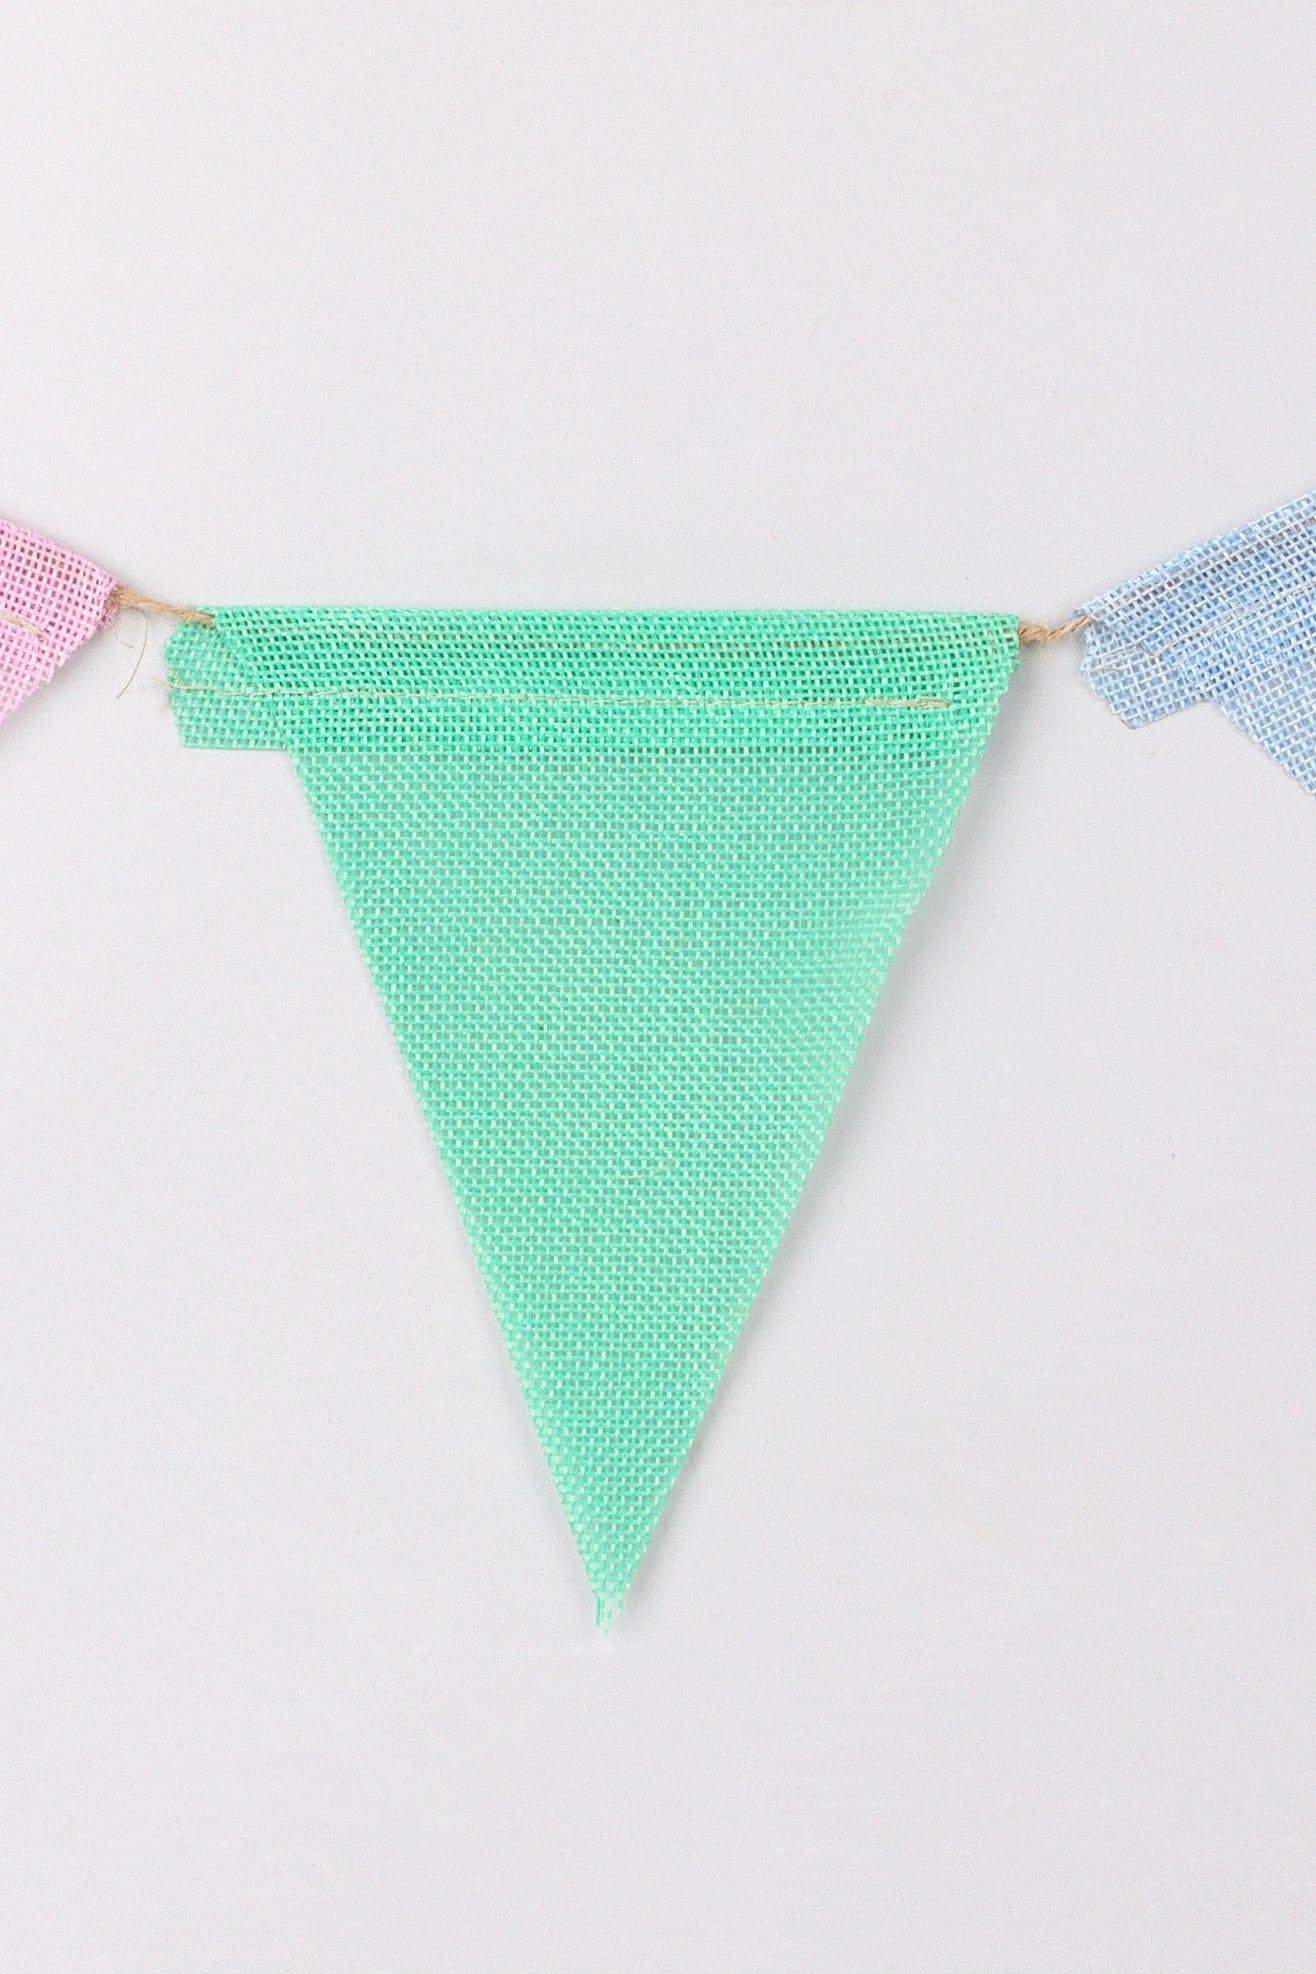 G Decor Bunting Assorted Colourful Rustic Hessian Bunting